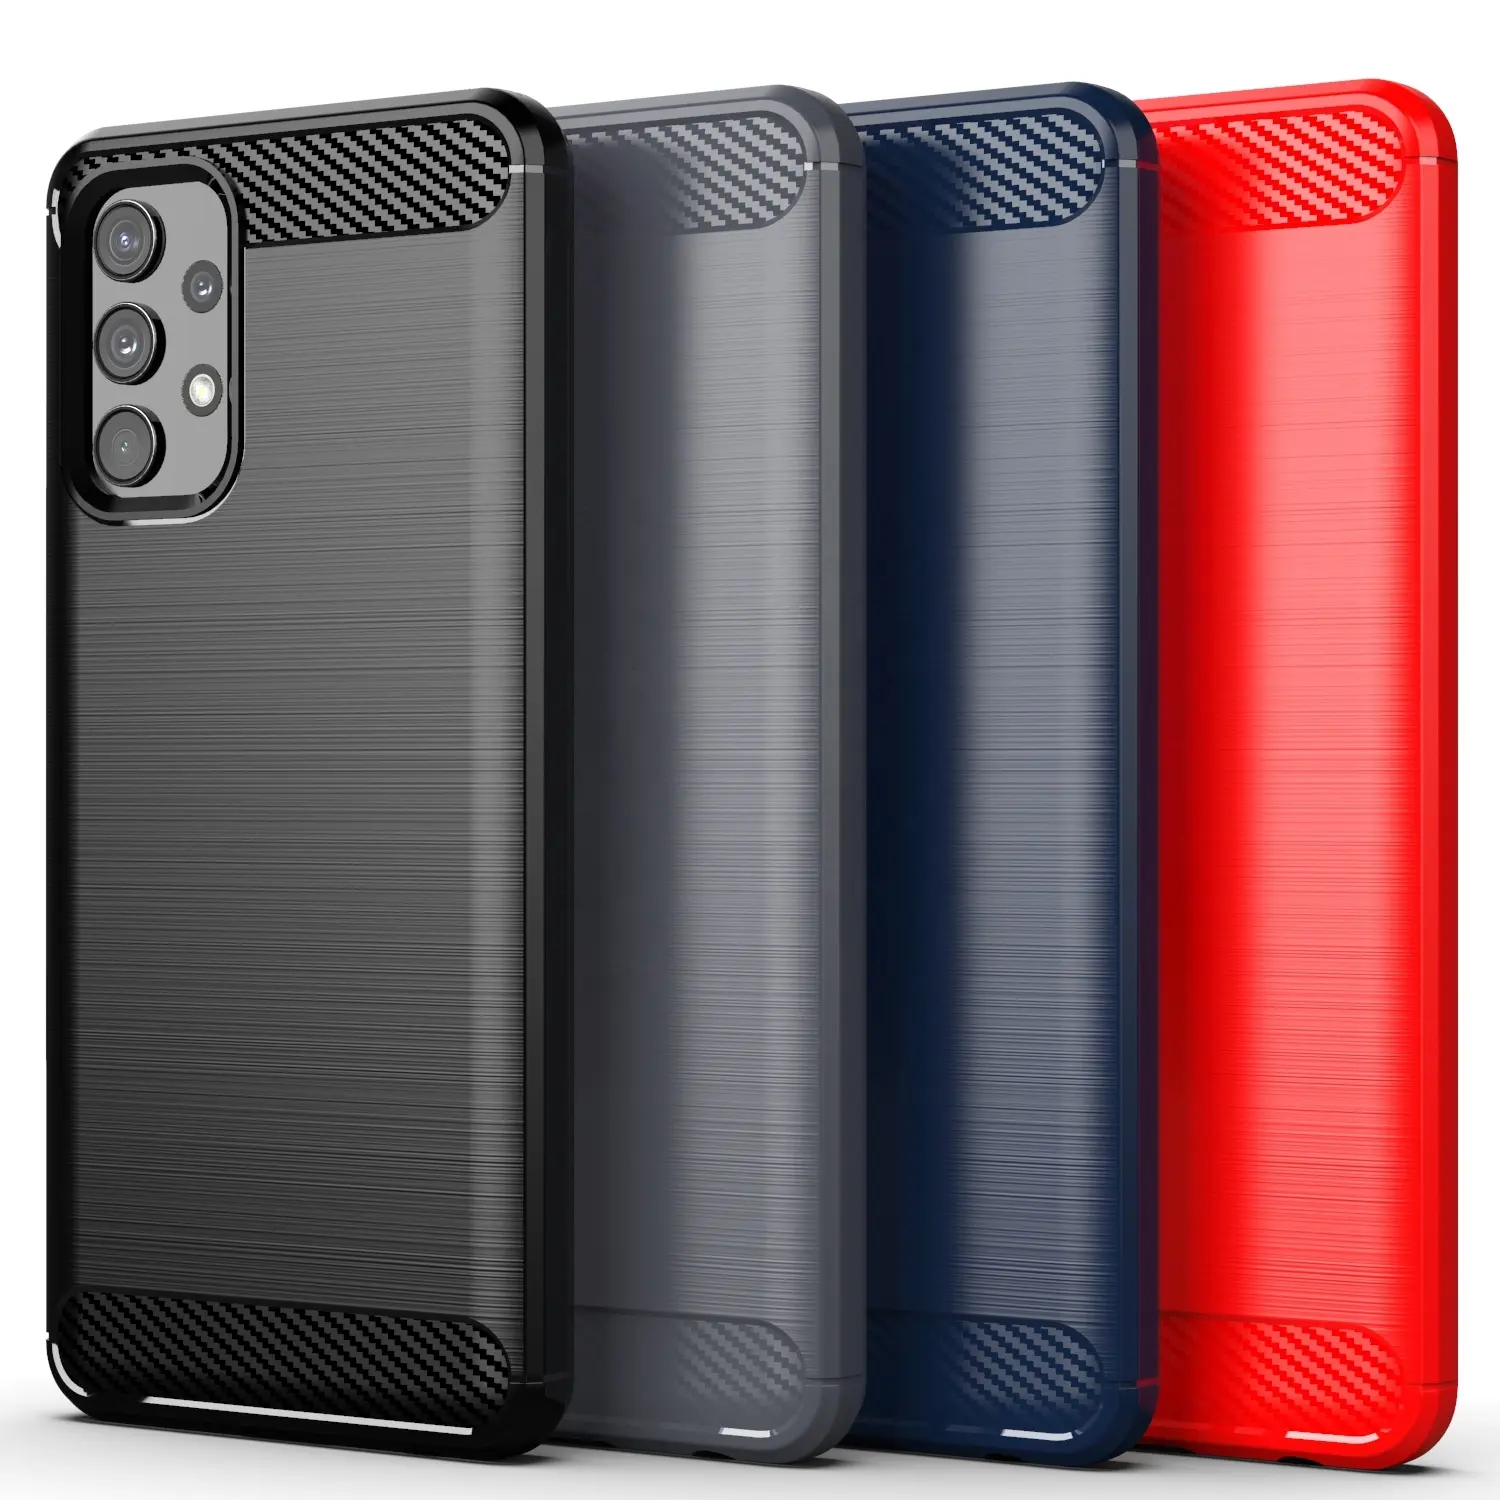 Hot Selling Carbon Fiber TPU Dirt Resistance Mobile Phone Cover for Samsung A32 4G Black Case